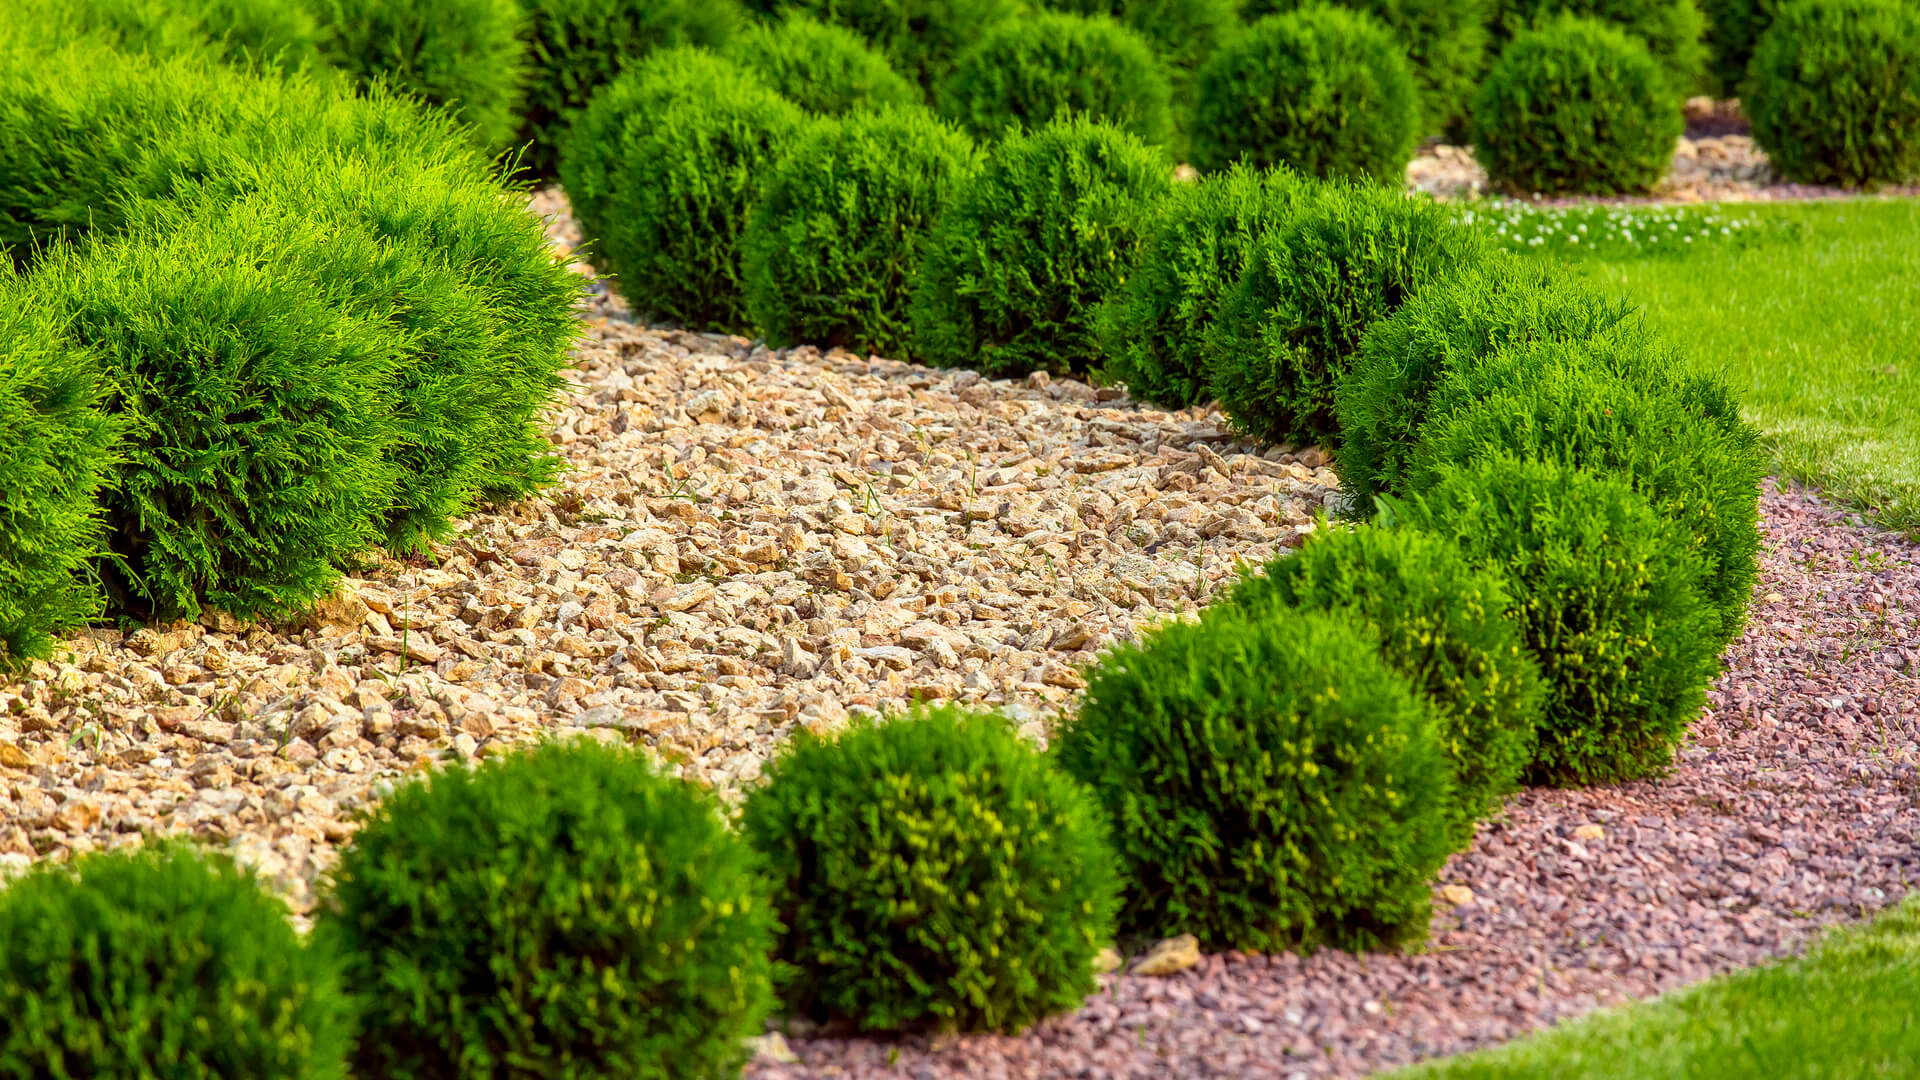 Sustainable Lawn Care: Frisco, TX Experts Share Tips On Earth-Friendly Yard Maintenance